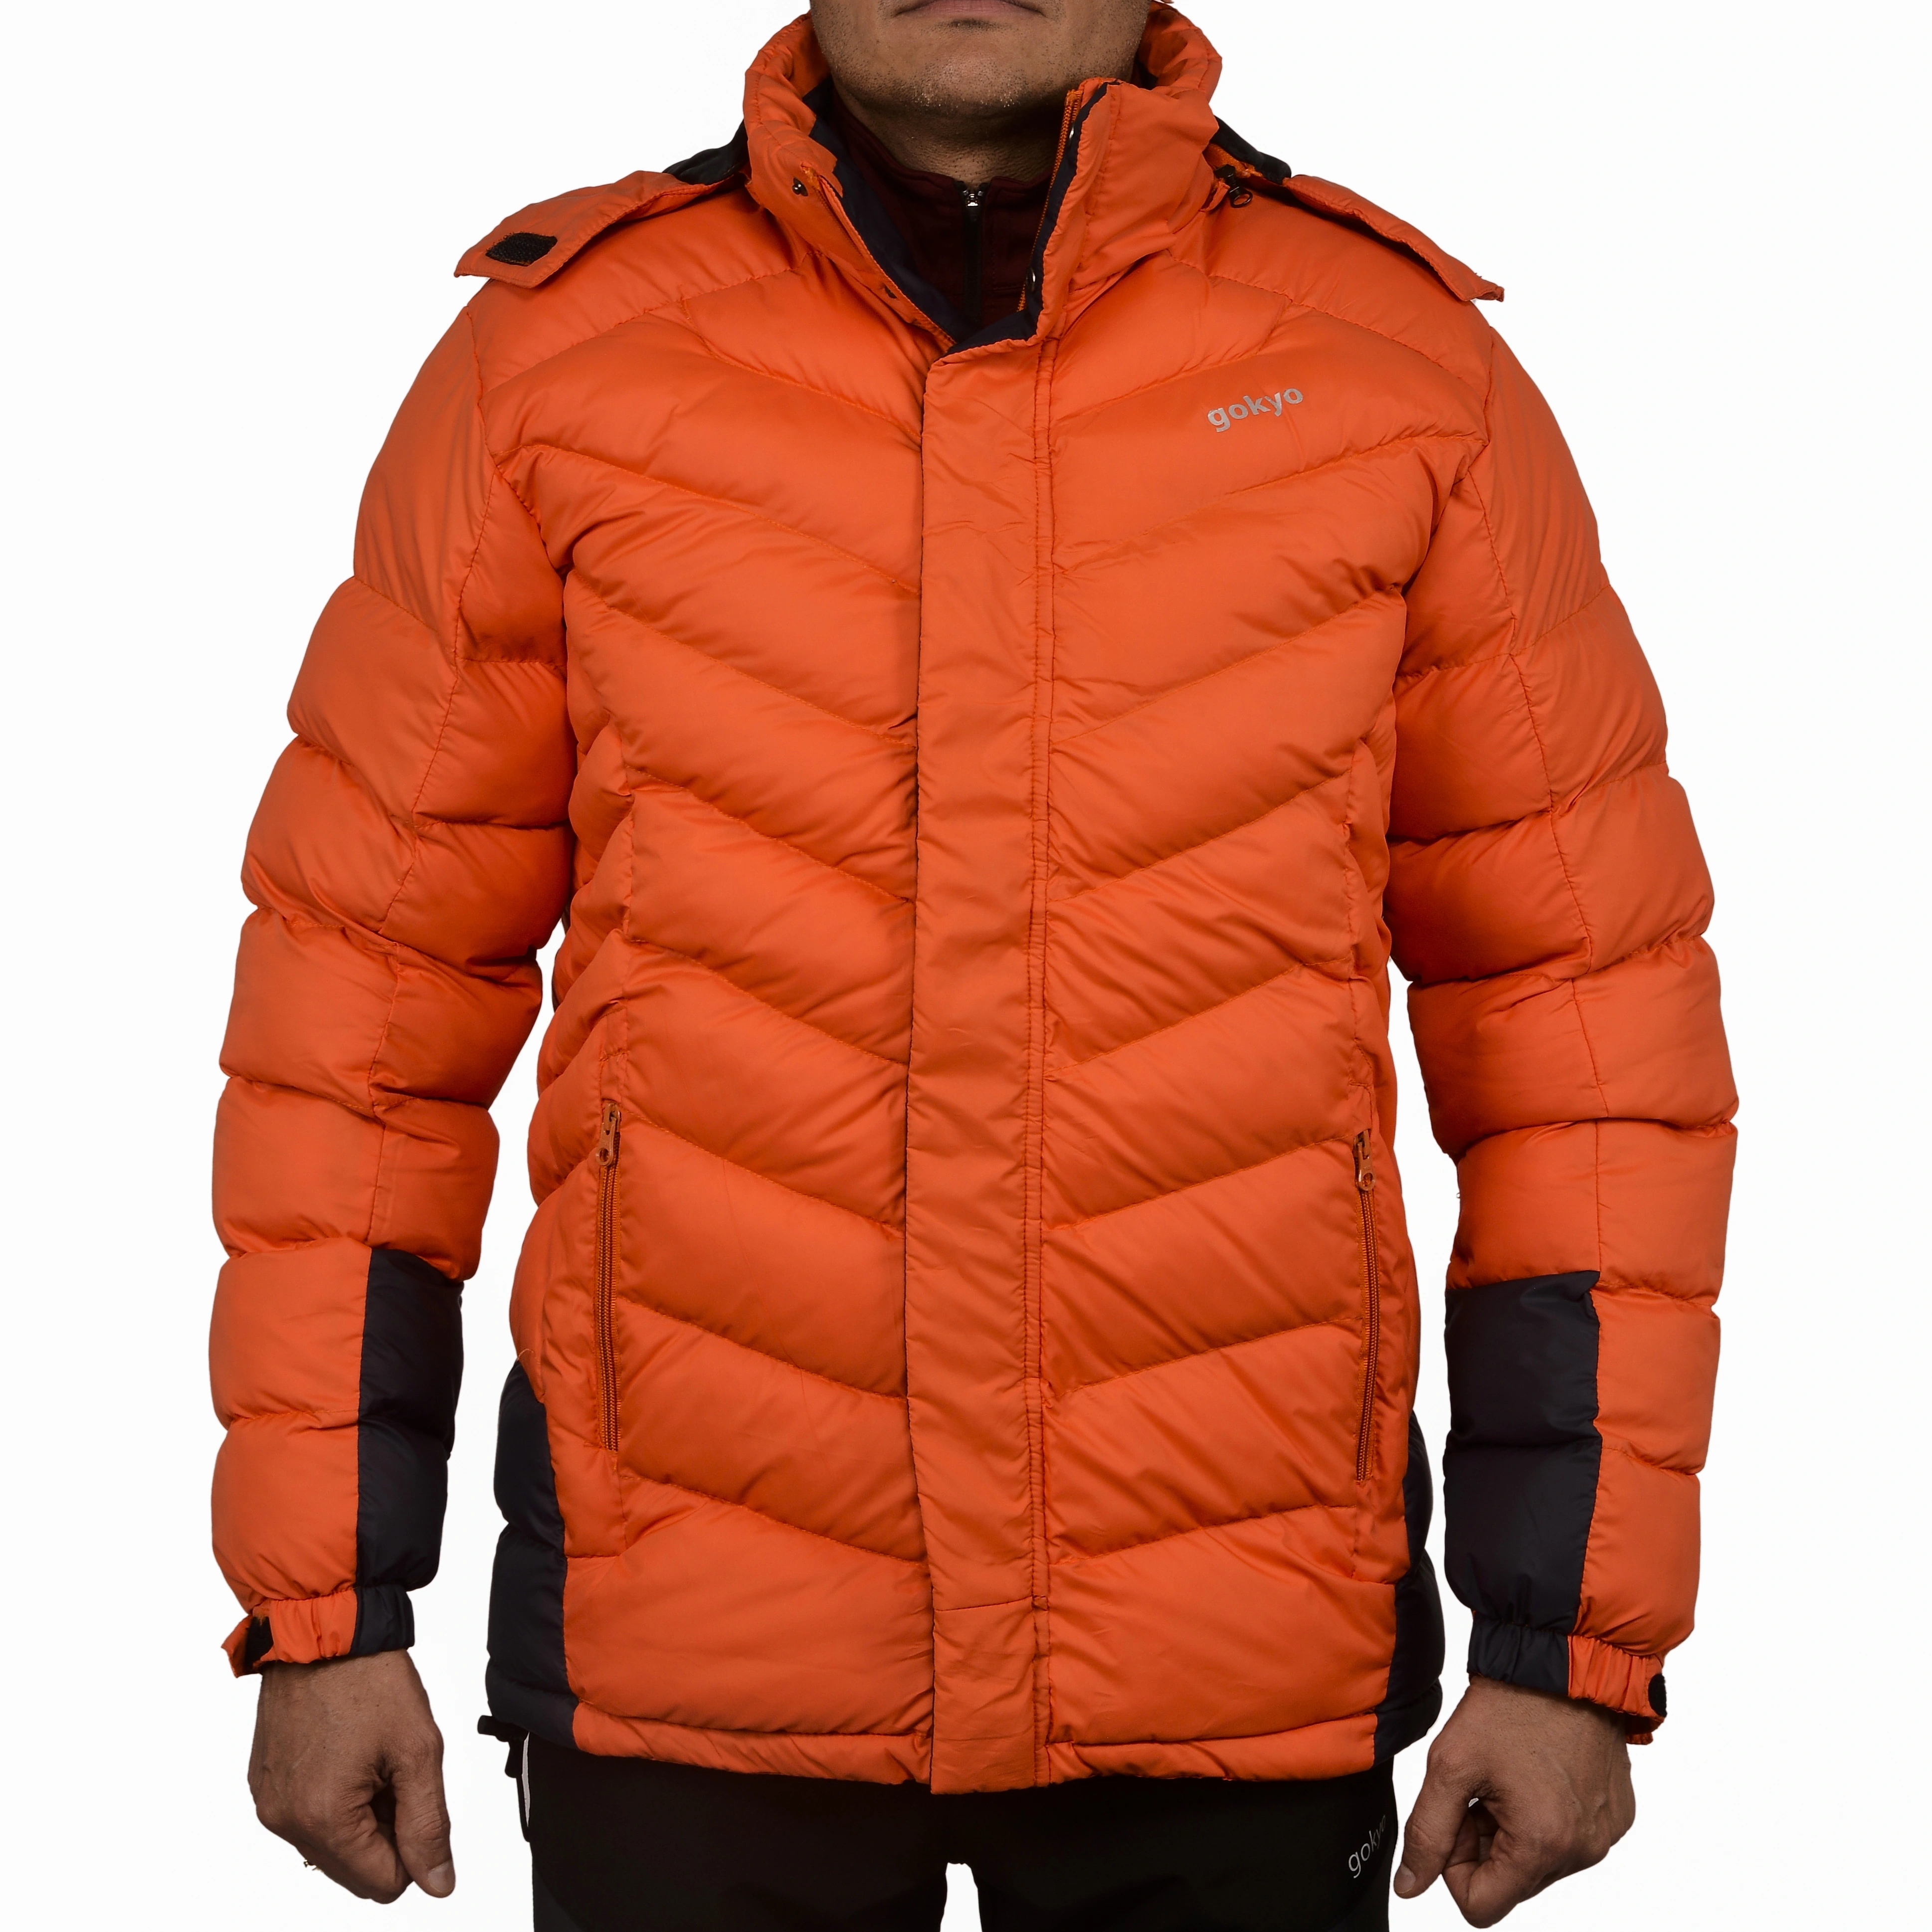 K2 Survivor Down Jacket for Men: Stylized Functionality for Extreme Cold Weather Expeditions (Up to -20°C)-230106